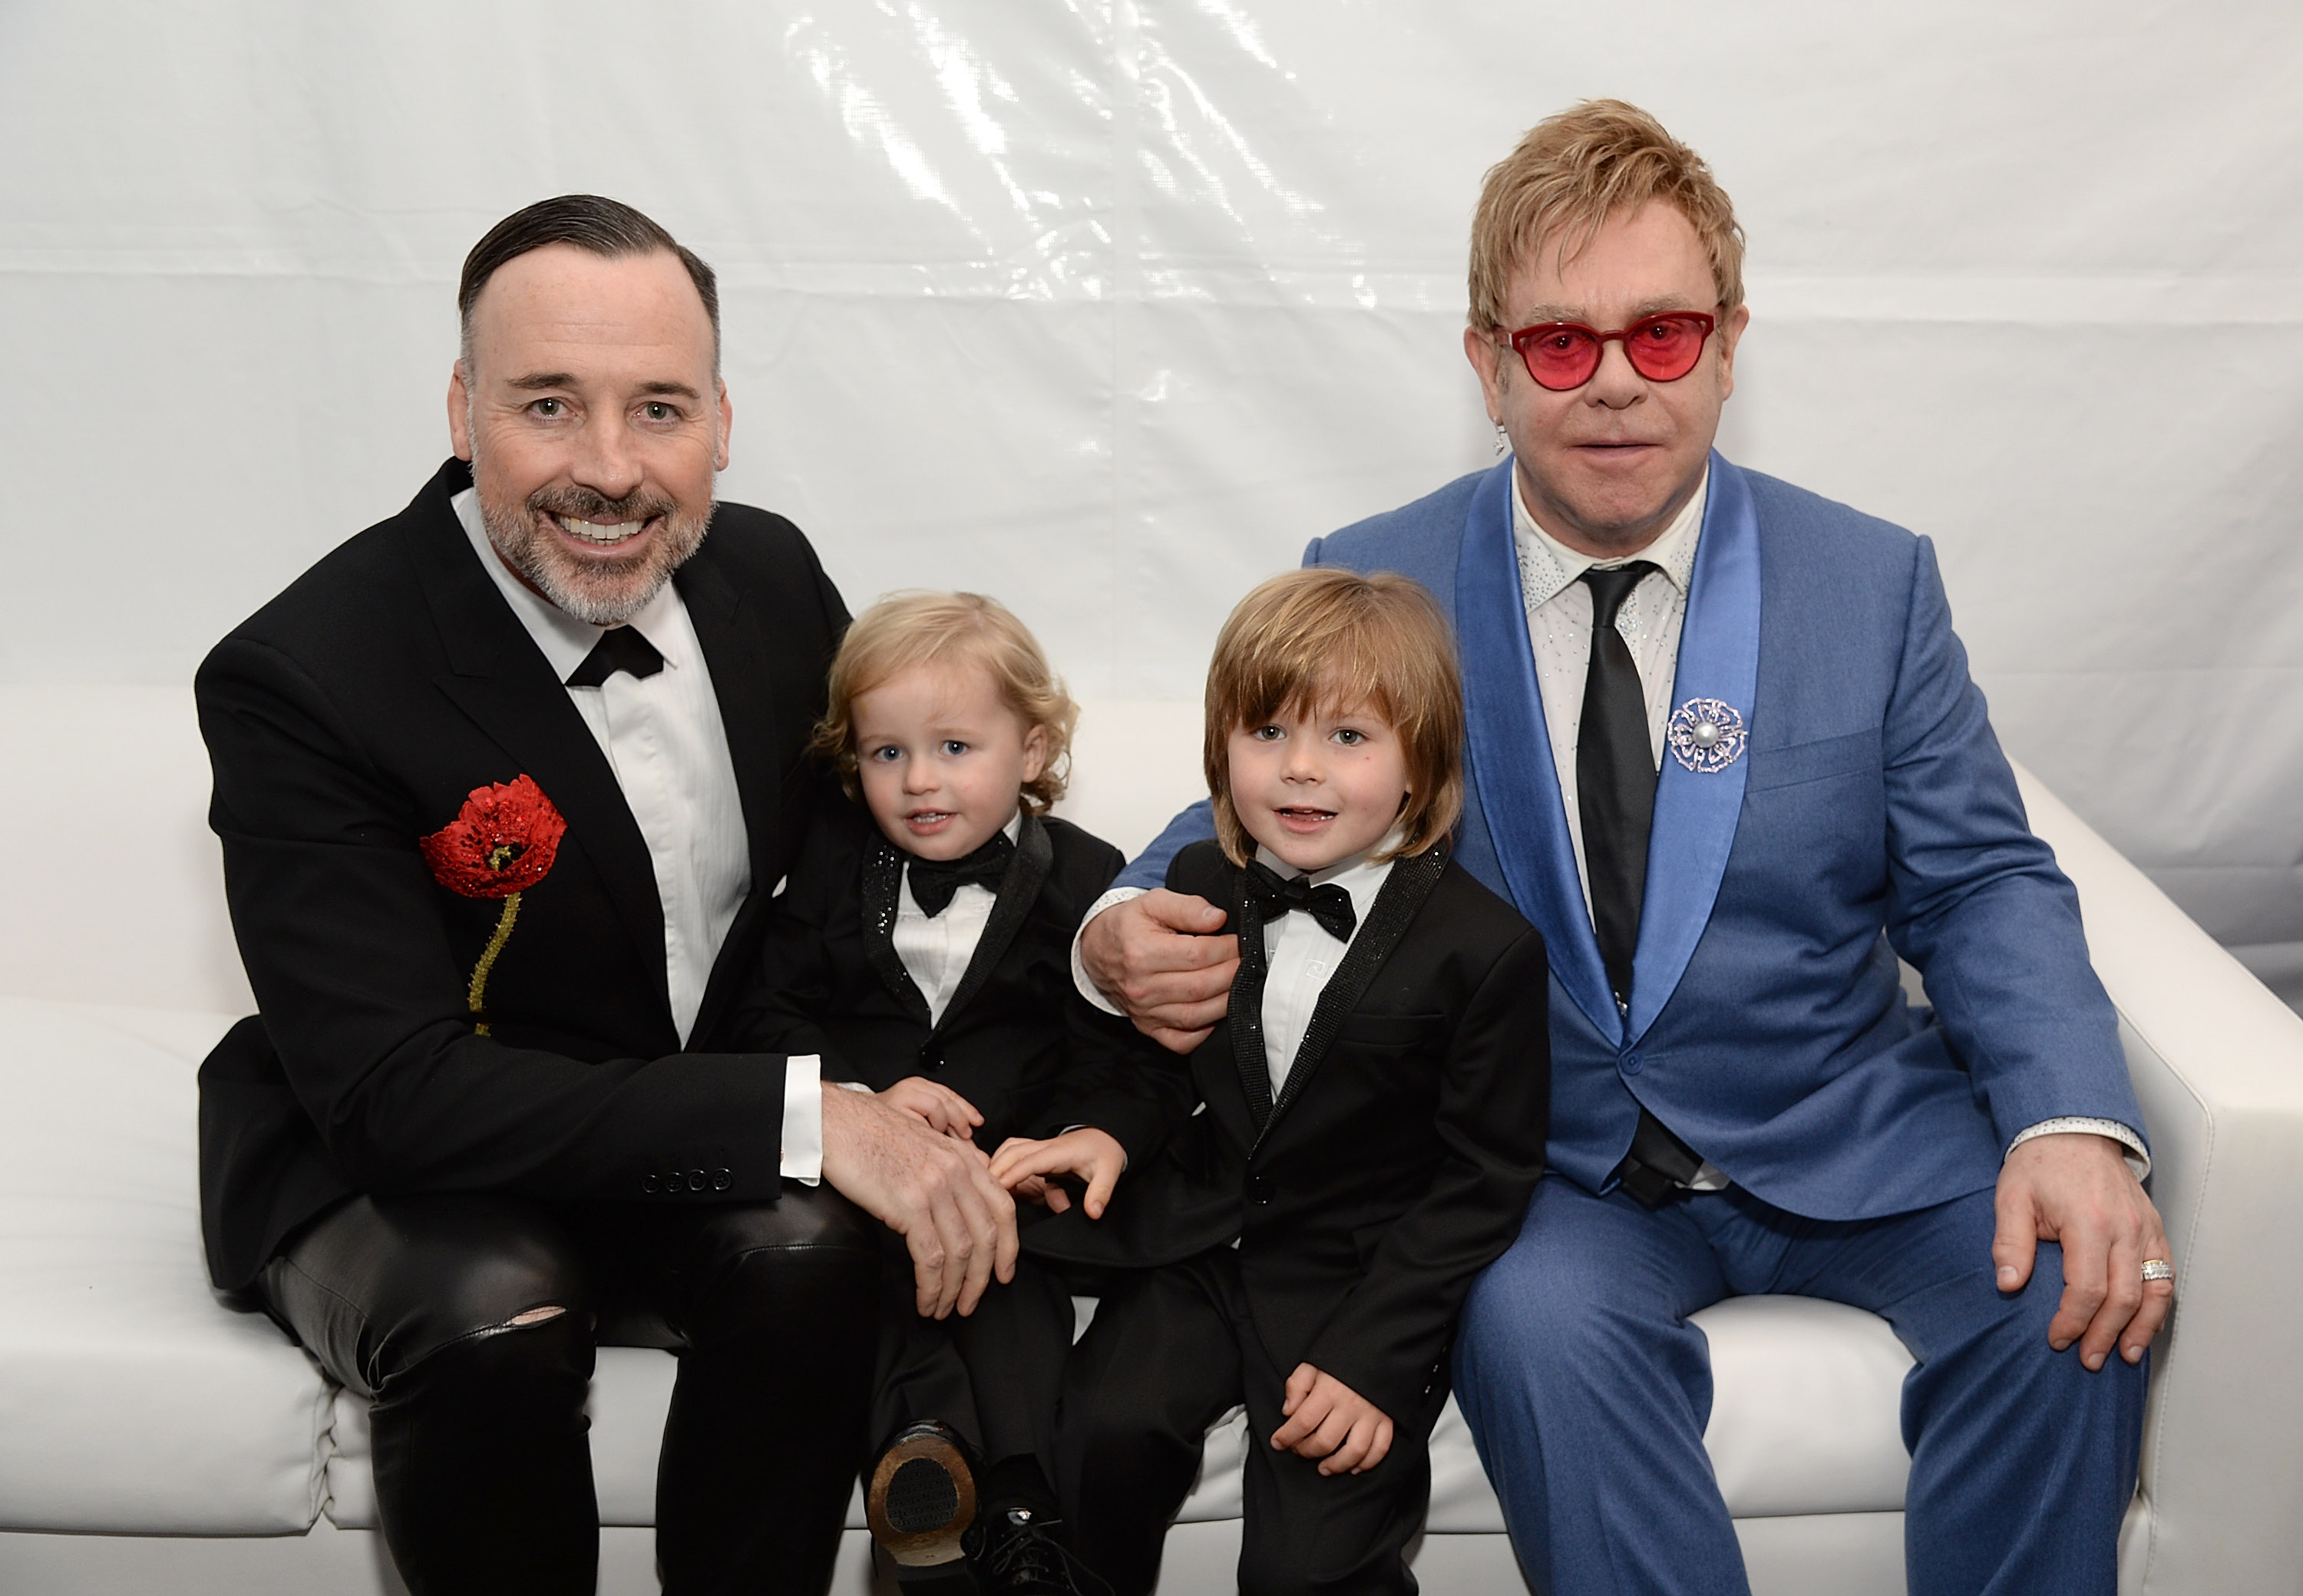 David Furnish and ,Elton John with their children Elijah and Zachary AIDS Foundation Academy Awards in Los Angeles in 2015 | Source: Getty Images